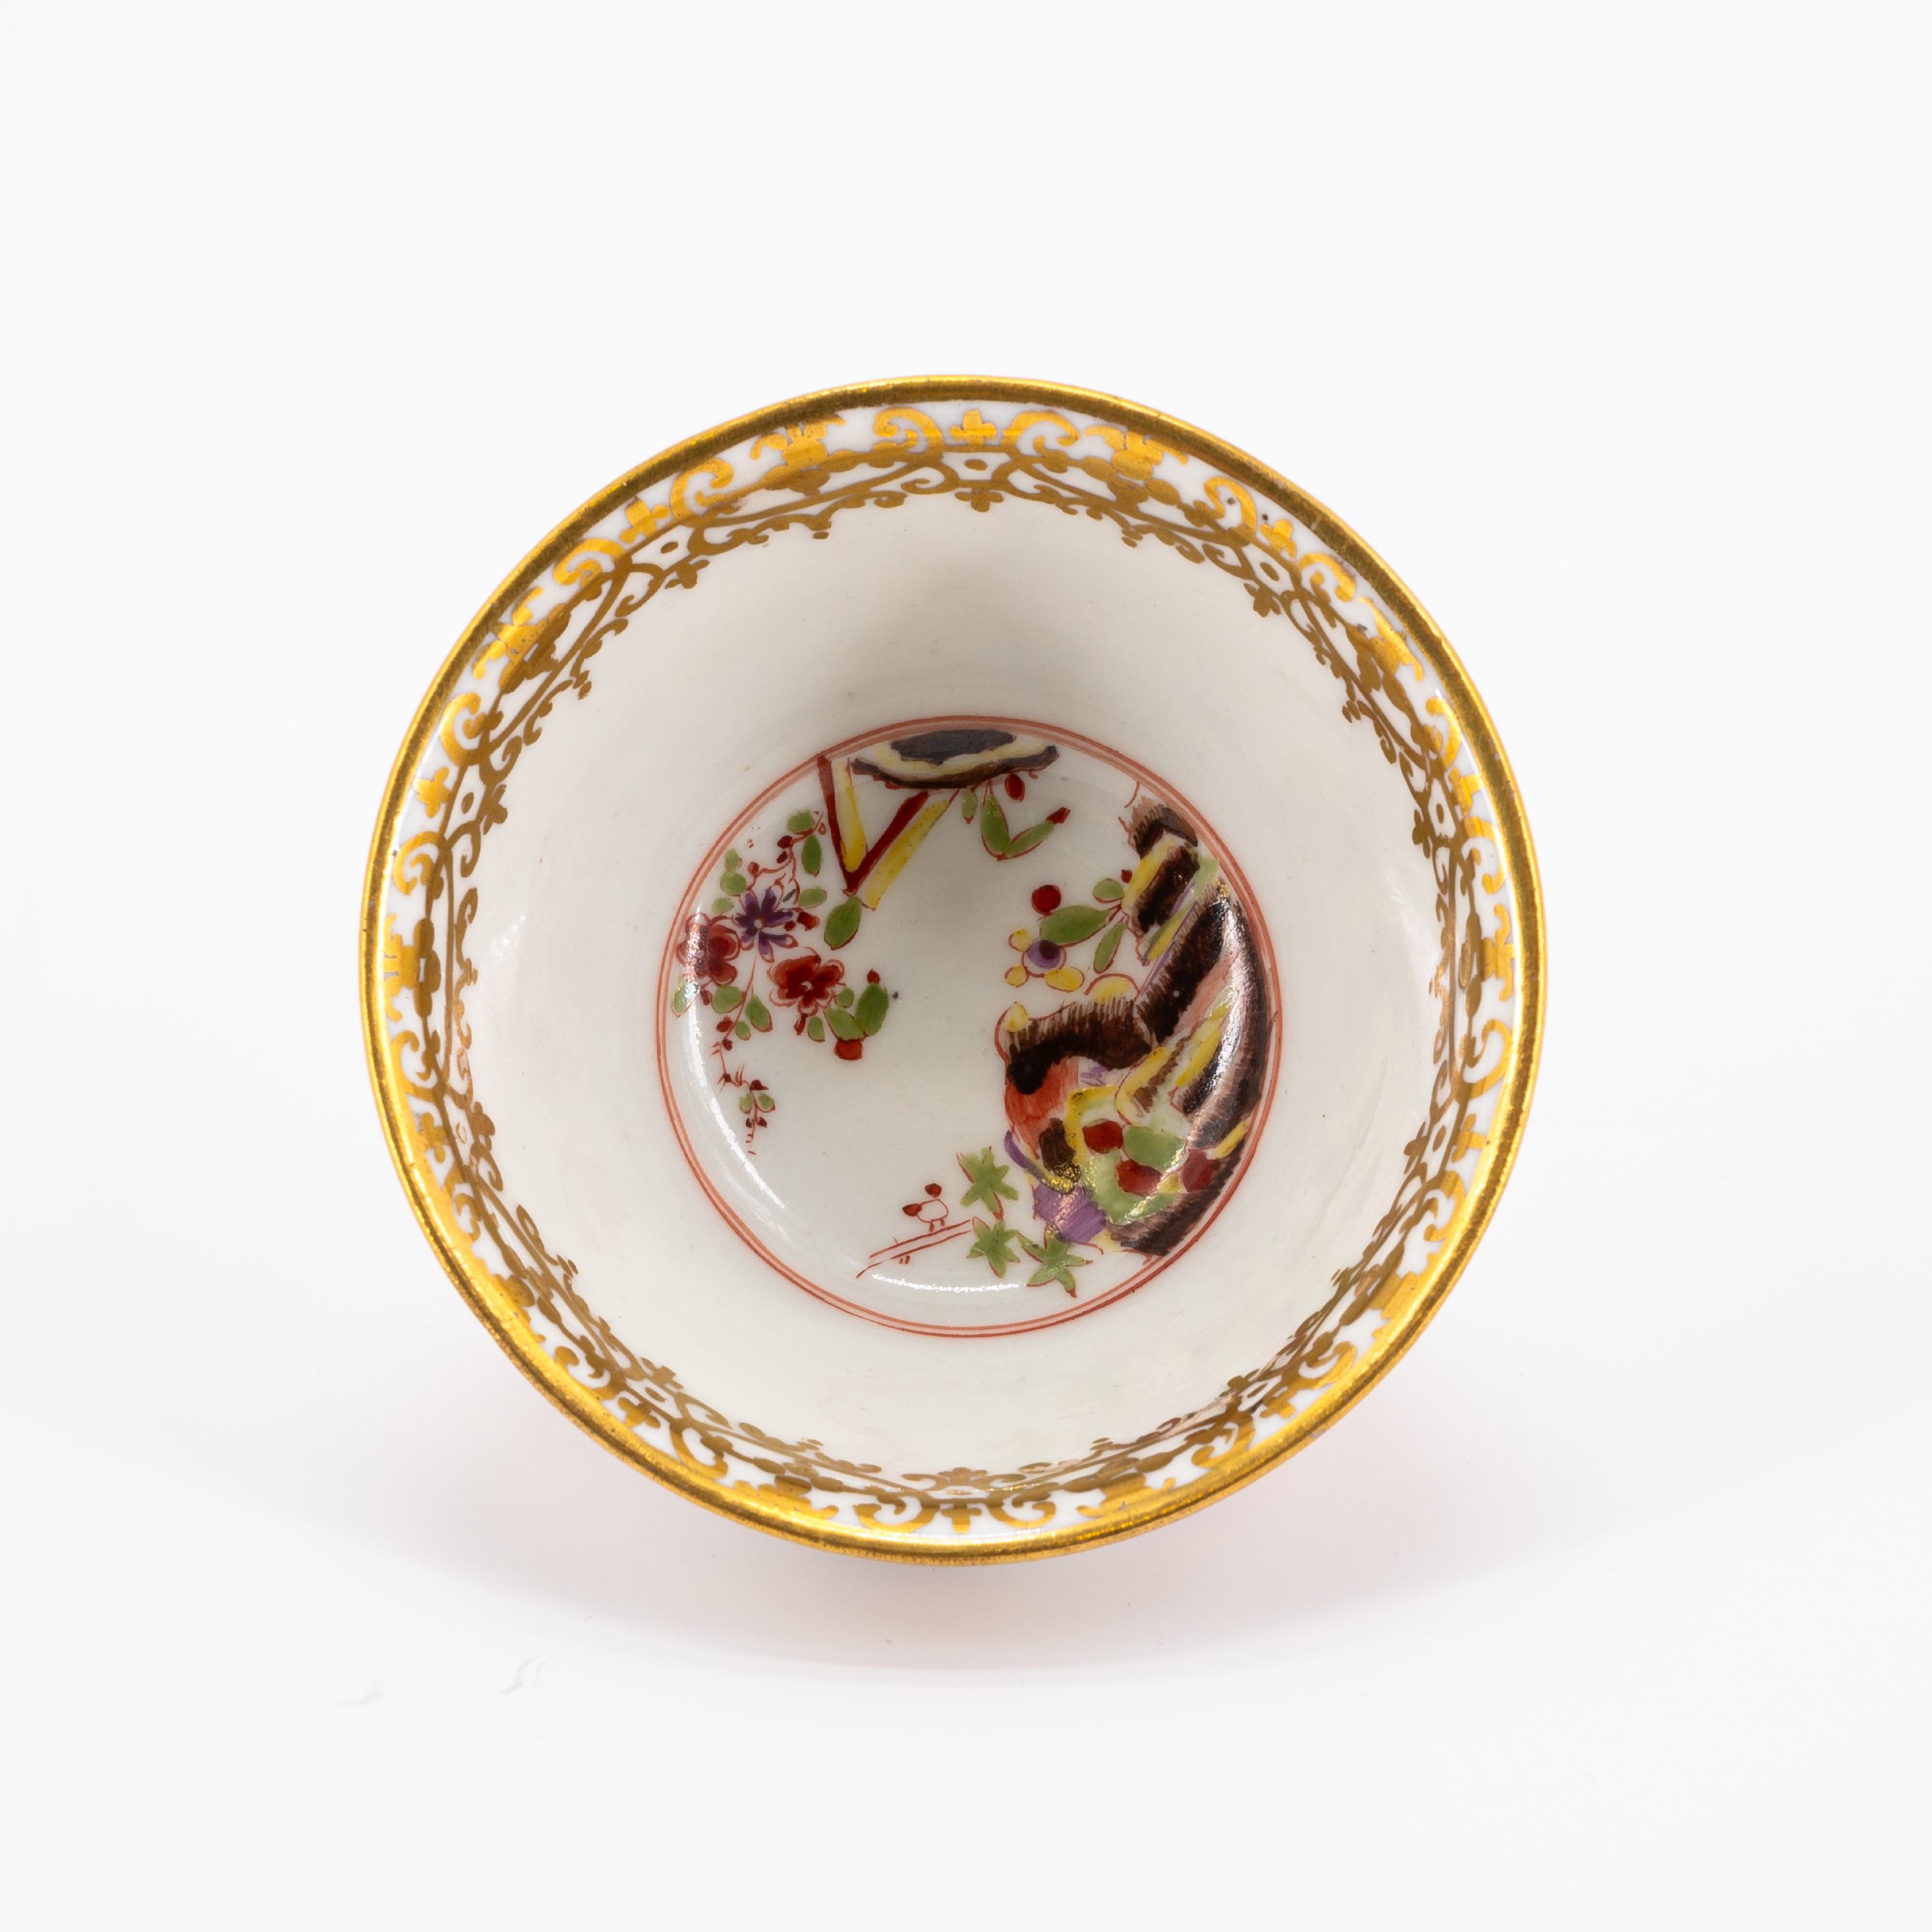 PORCELAIN TEA BOWL WITH CHINOISERIES - Image 5 of 6